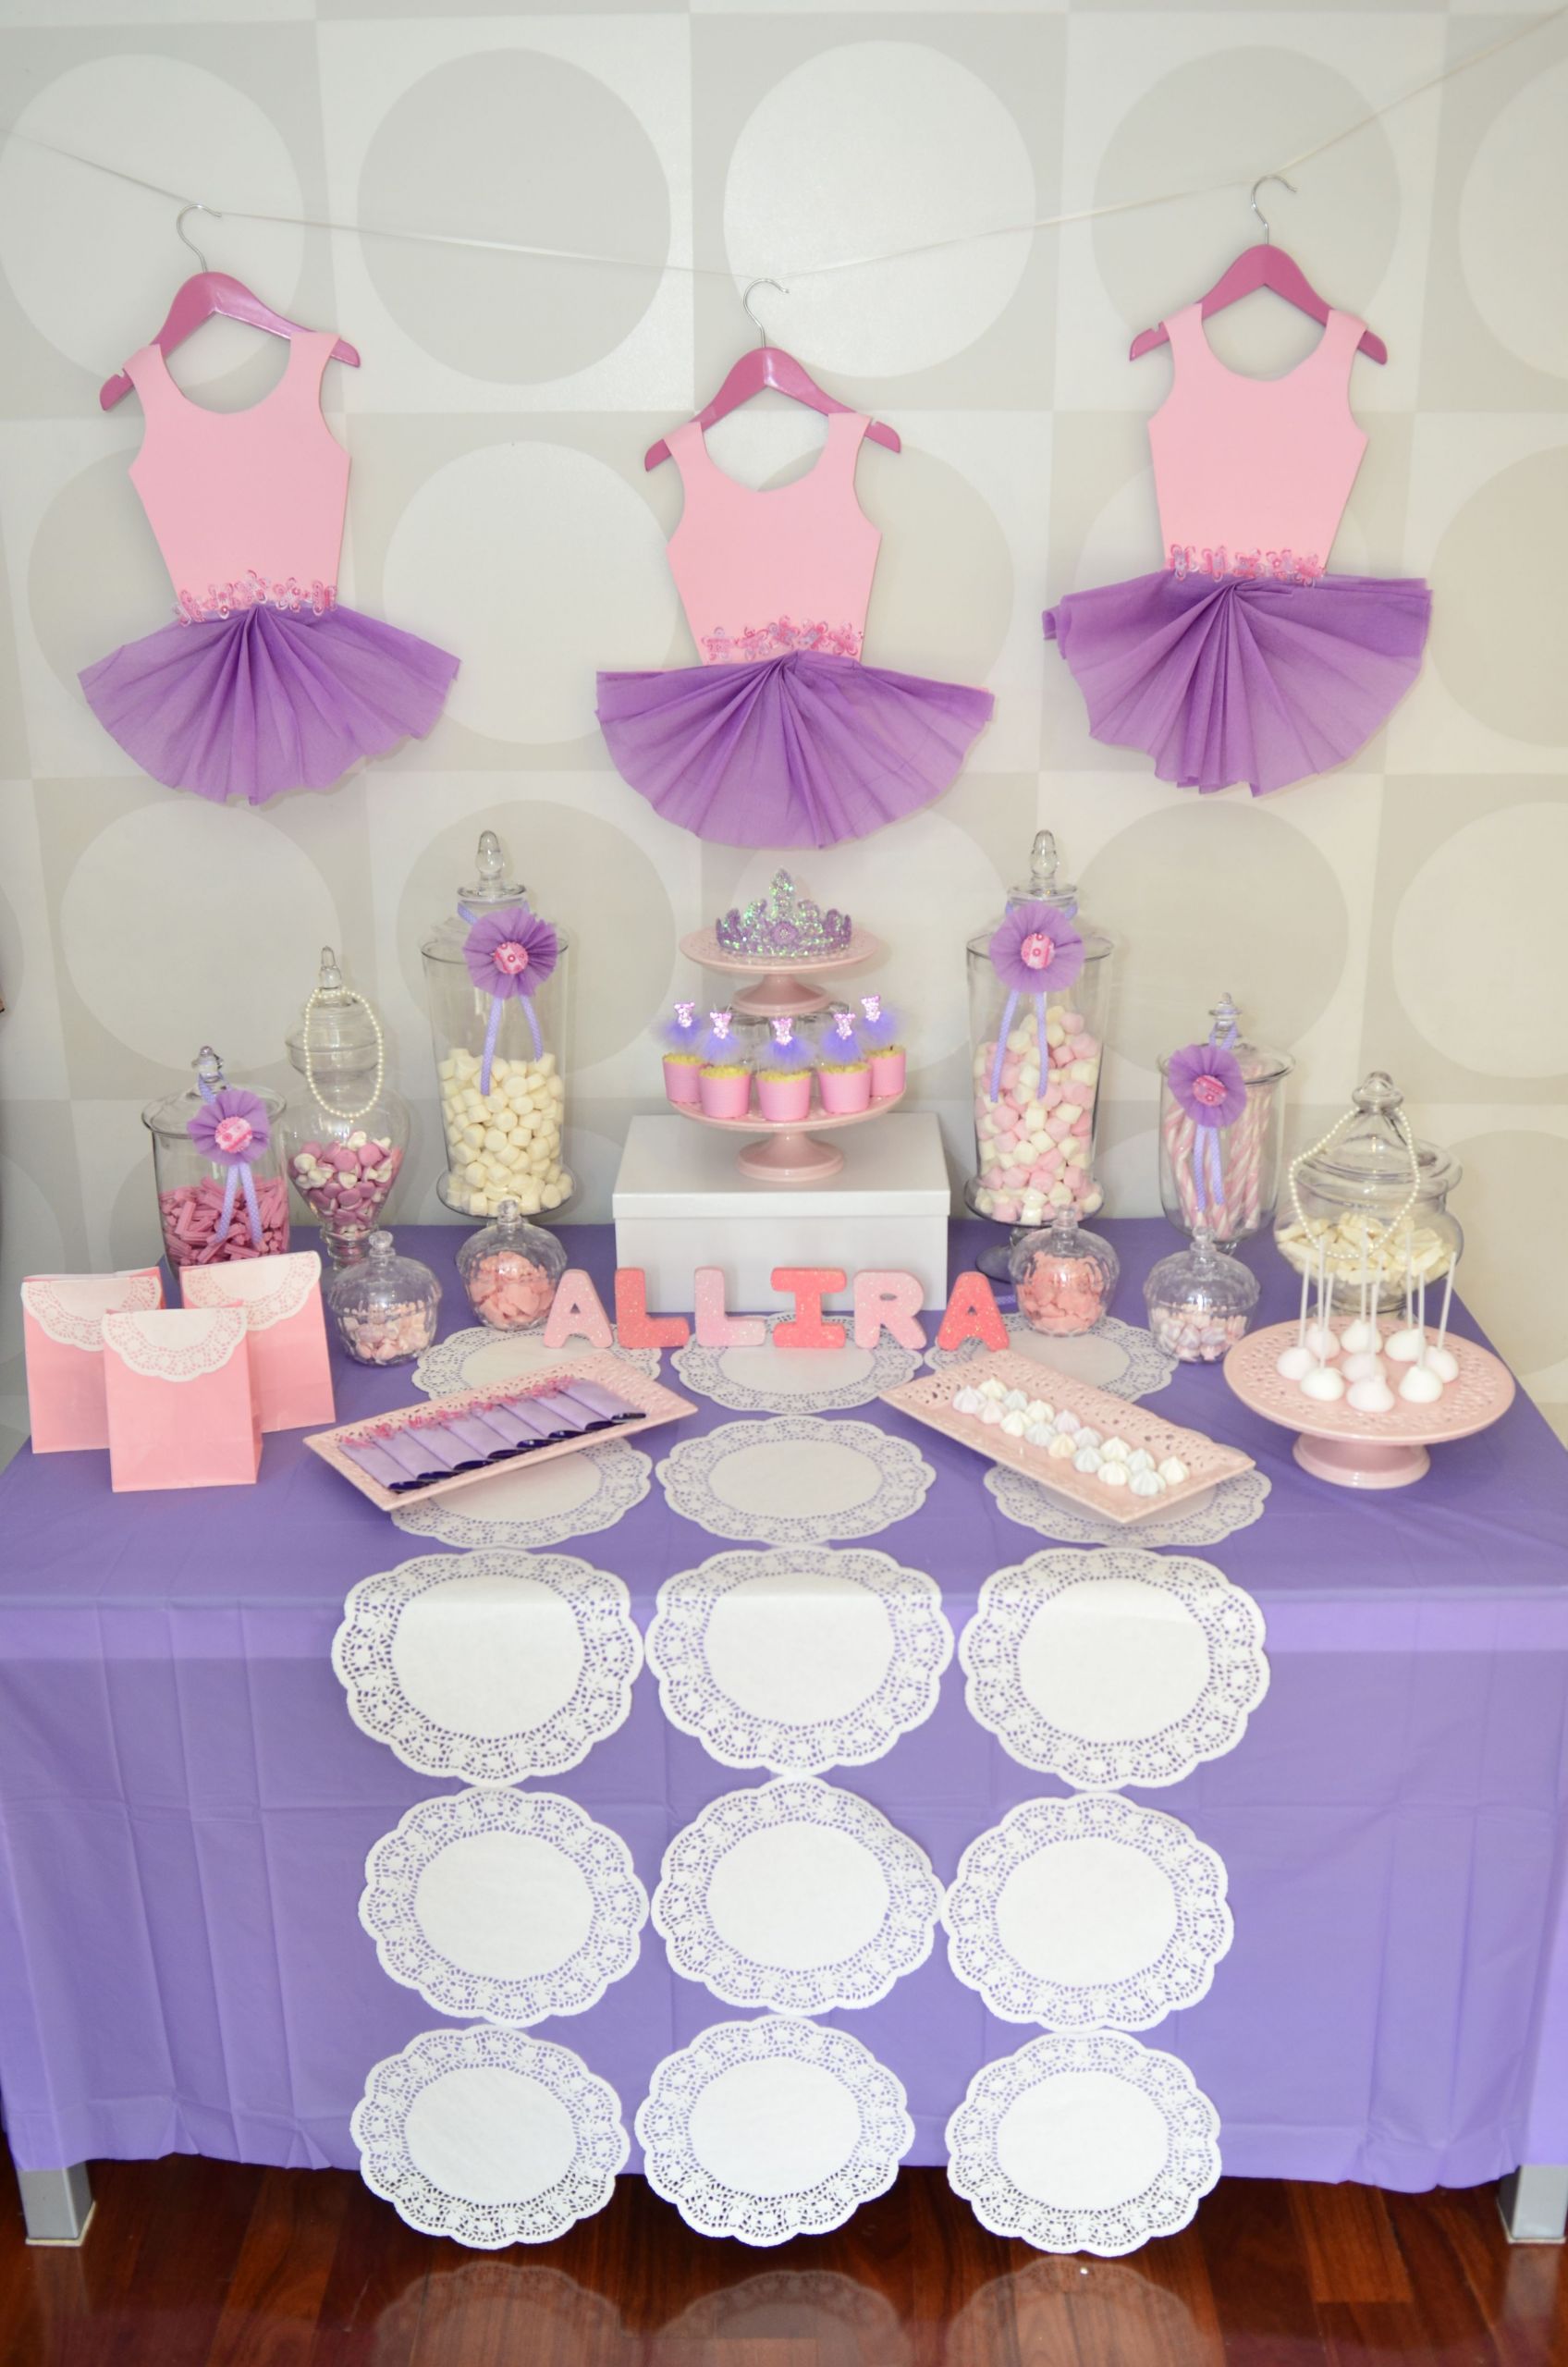 Party Decorations Baby Shower
 Ballerina Theme Candy Bar